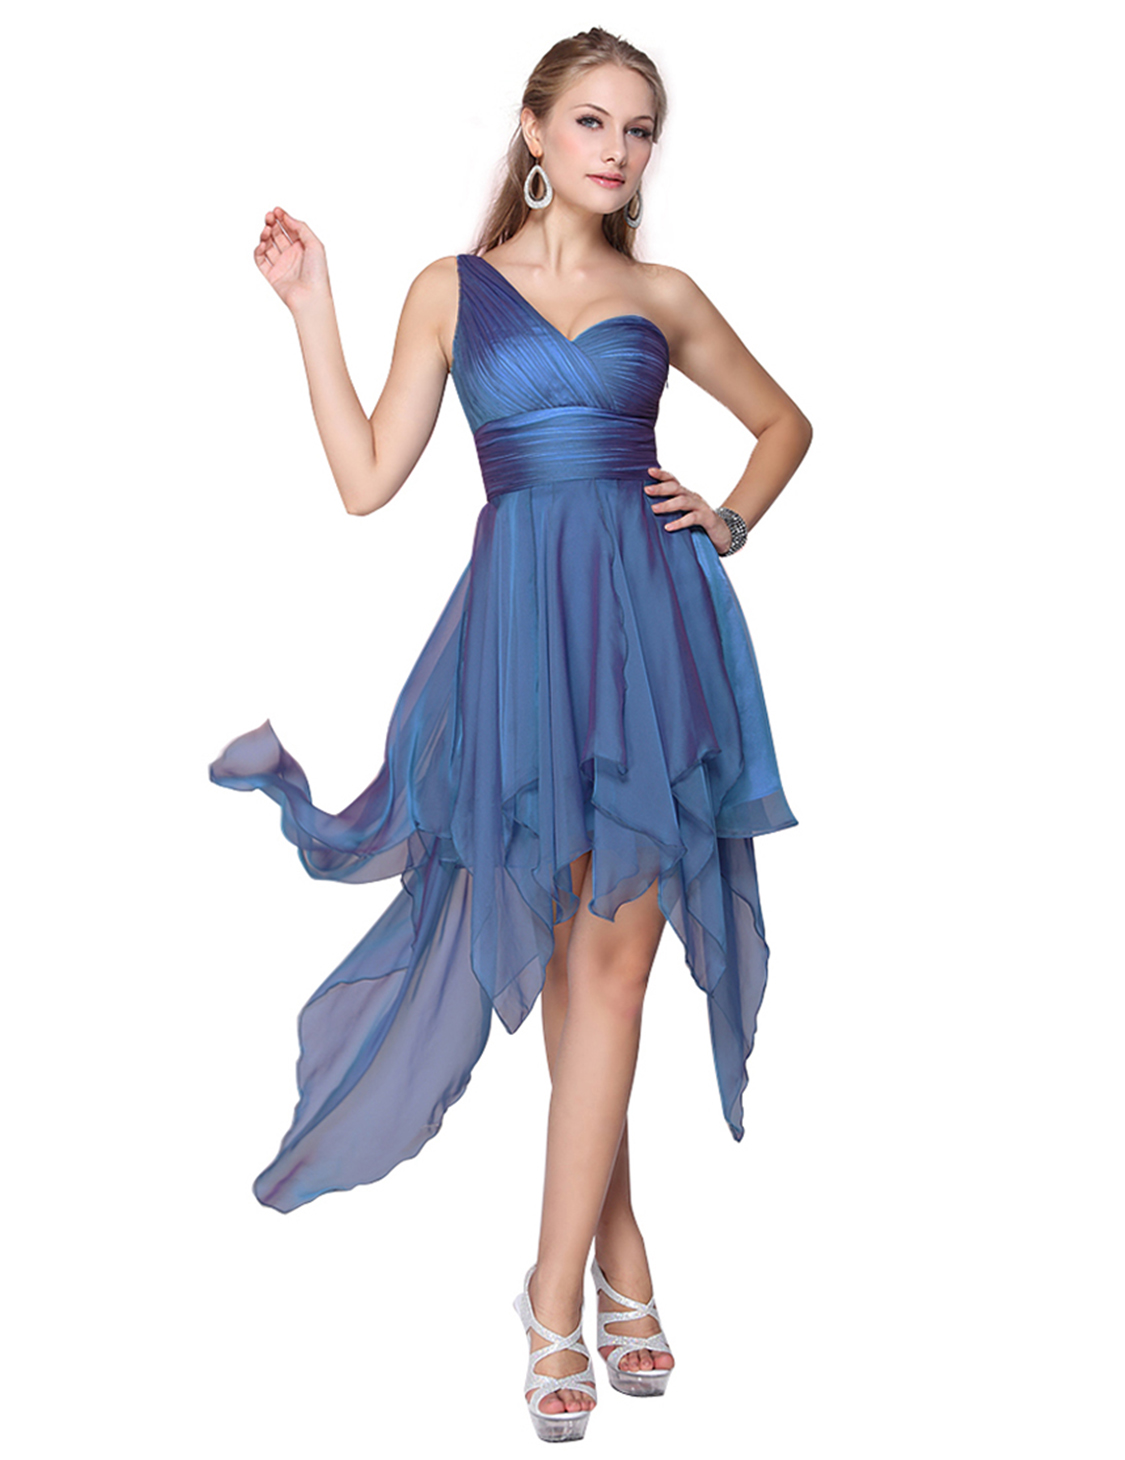 New Womens Halloween Blue Cocktail Party Dress 06093 UK Size 6 8 10 12 ...